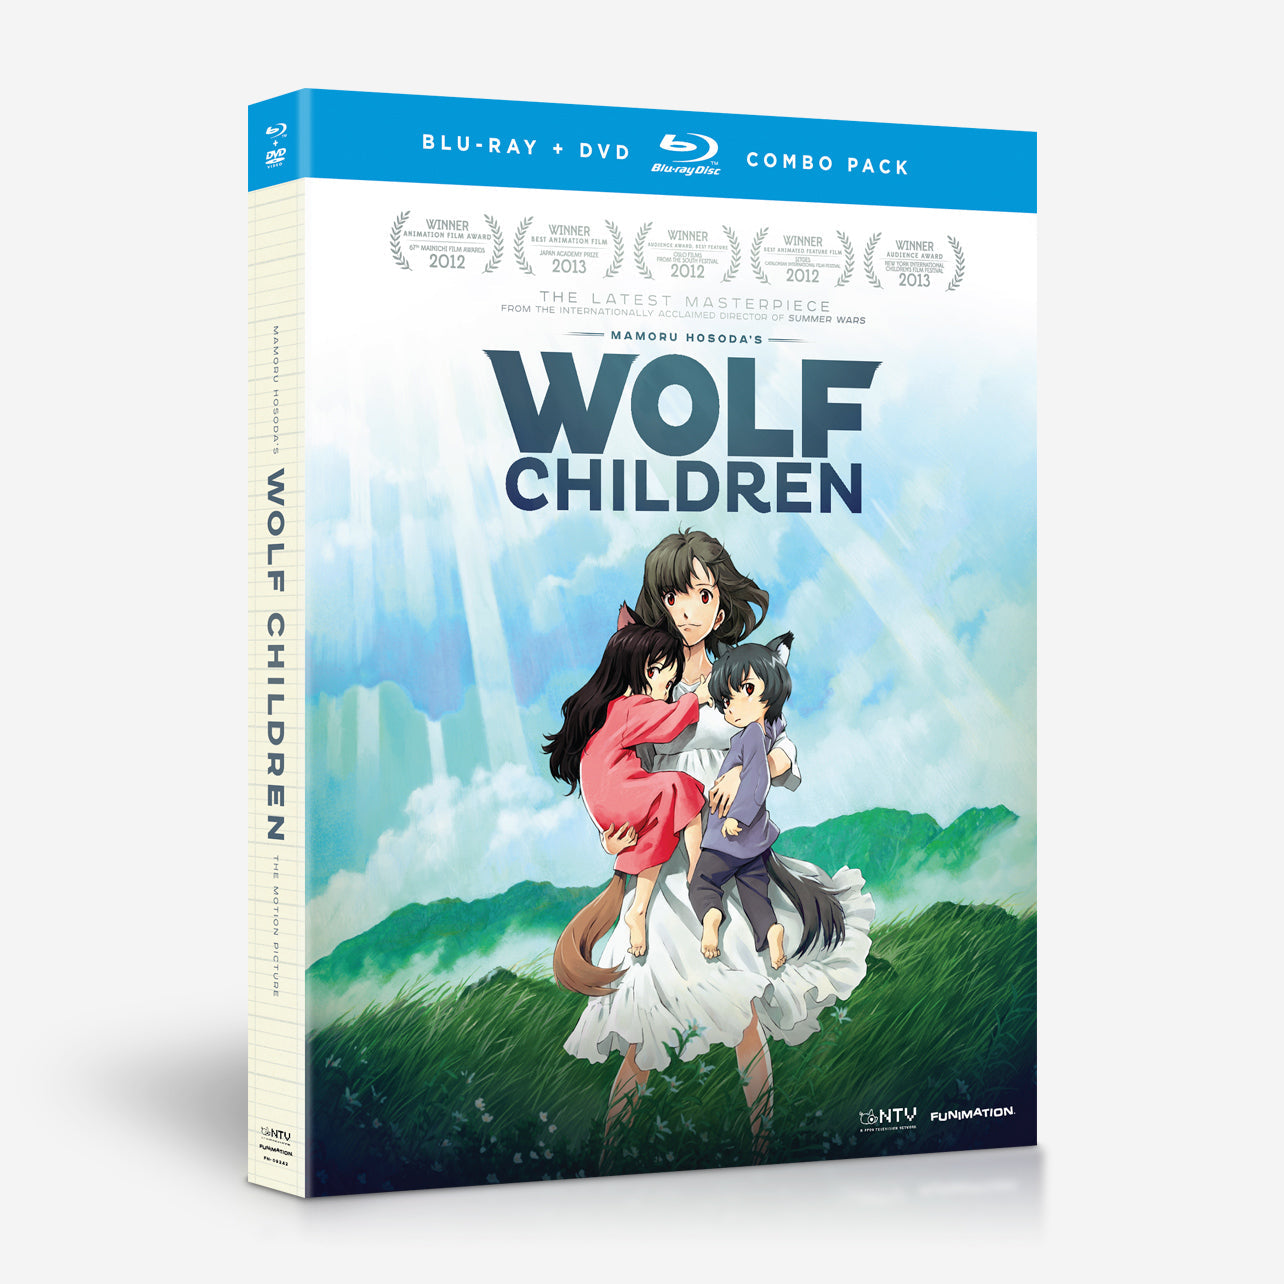 Wolf Children - The Movie - Blu-ray + DVD image count 0